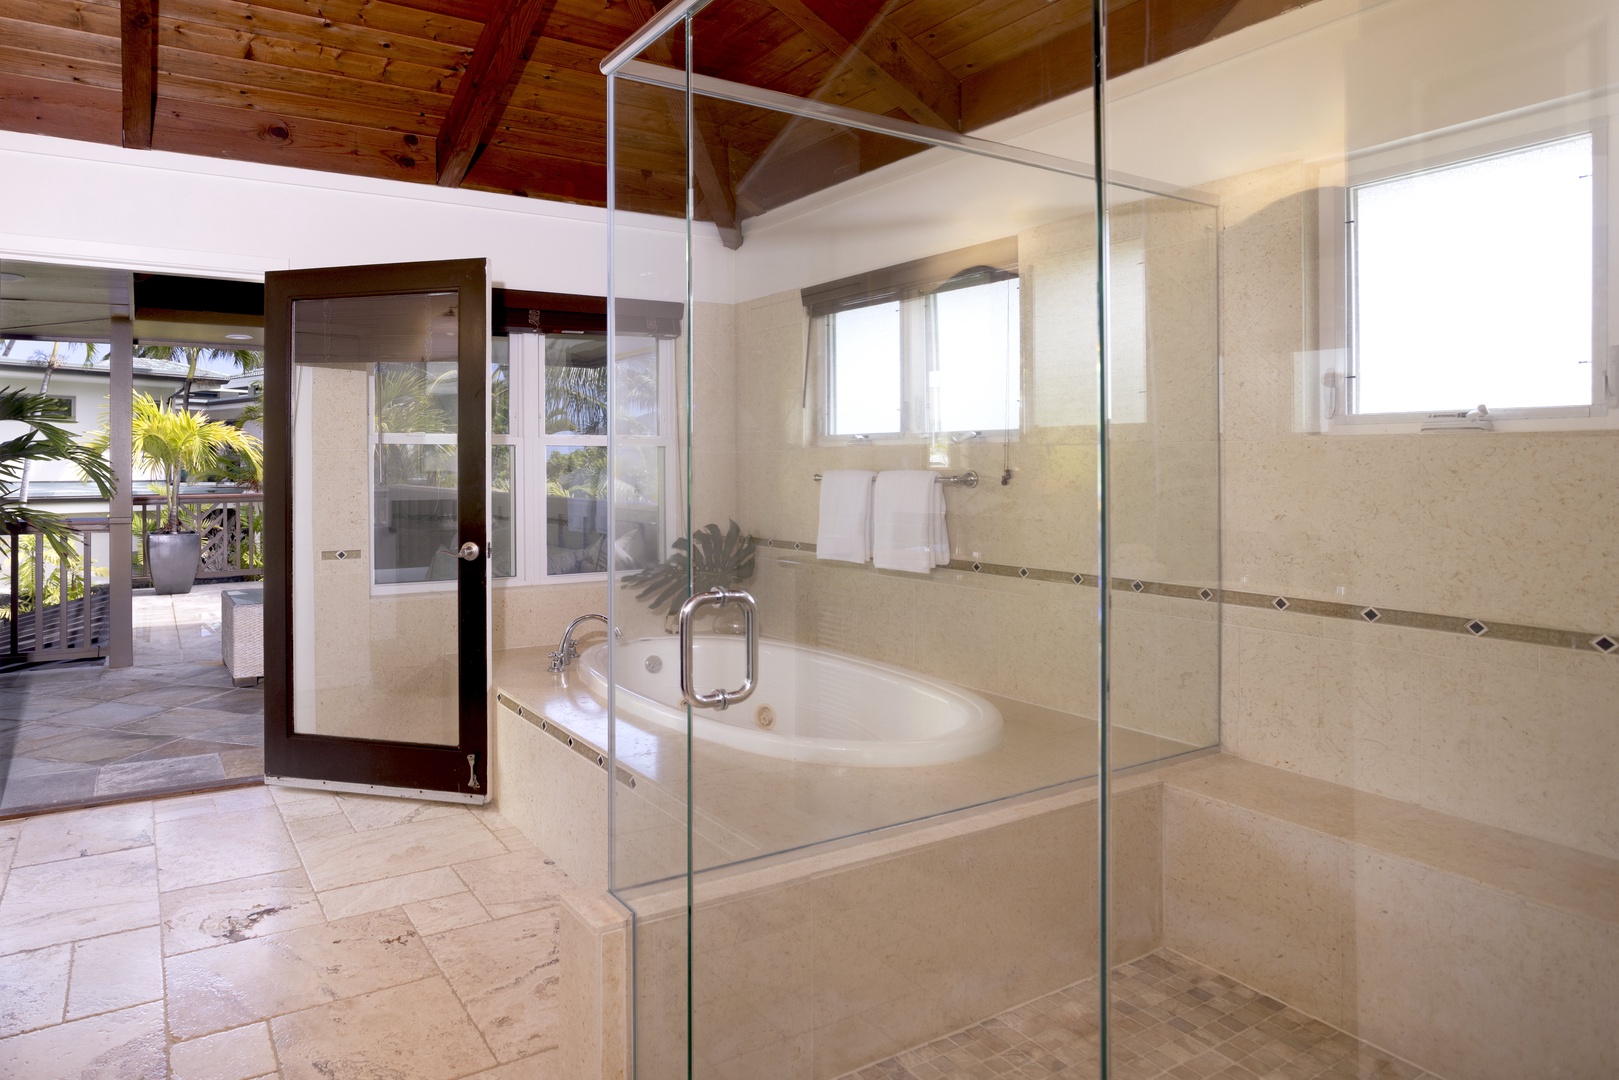 Kailua Vacation Rentals, Mokulua Seaside - Spa-like ensuite bathroom that is accented with glass enclosed walk-in shower, a large soaking tub and an easy access to the private lanai